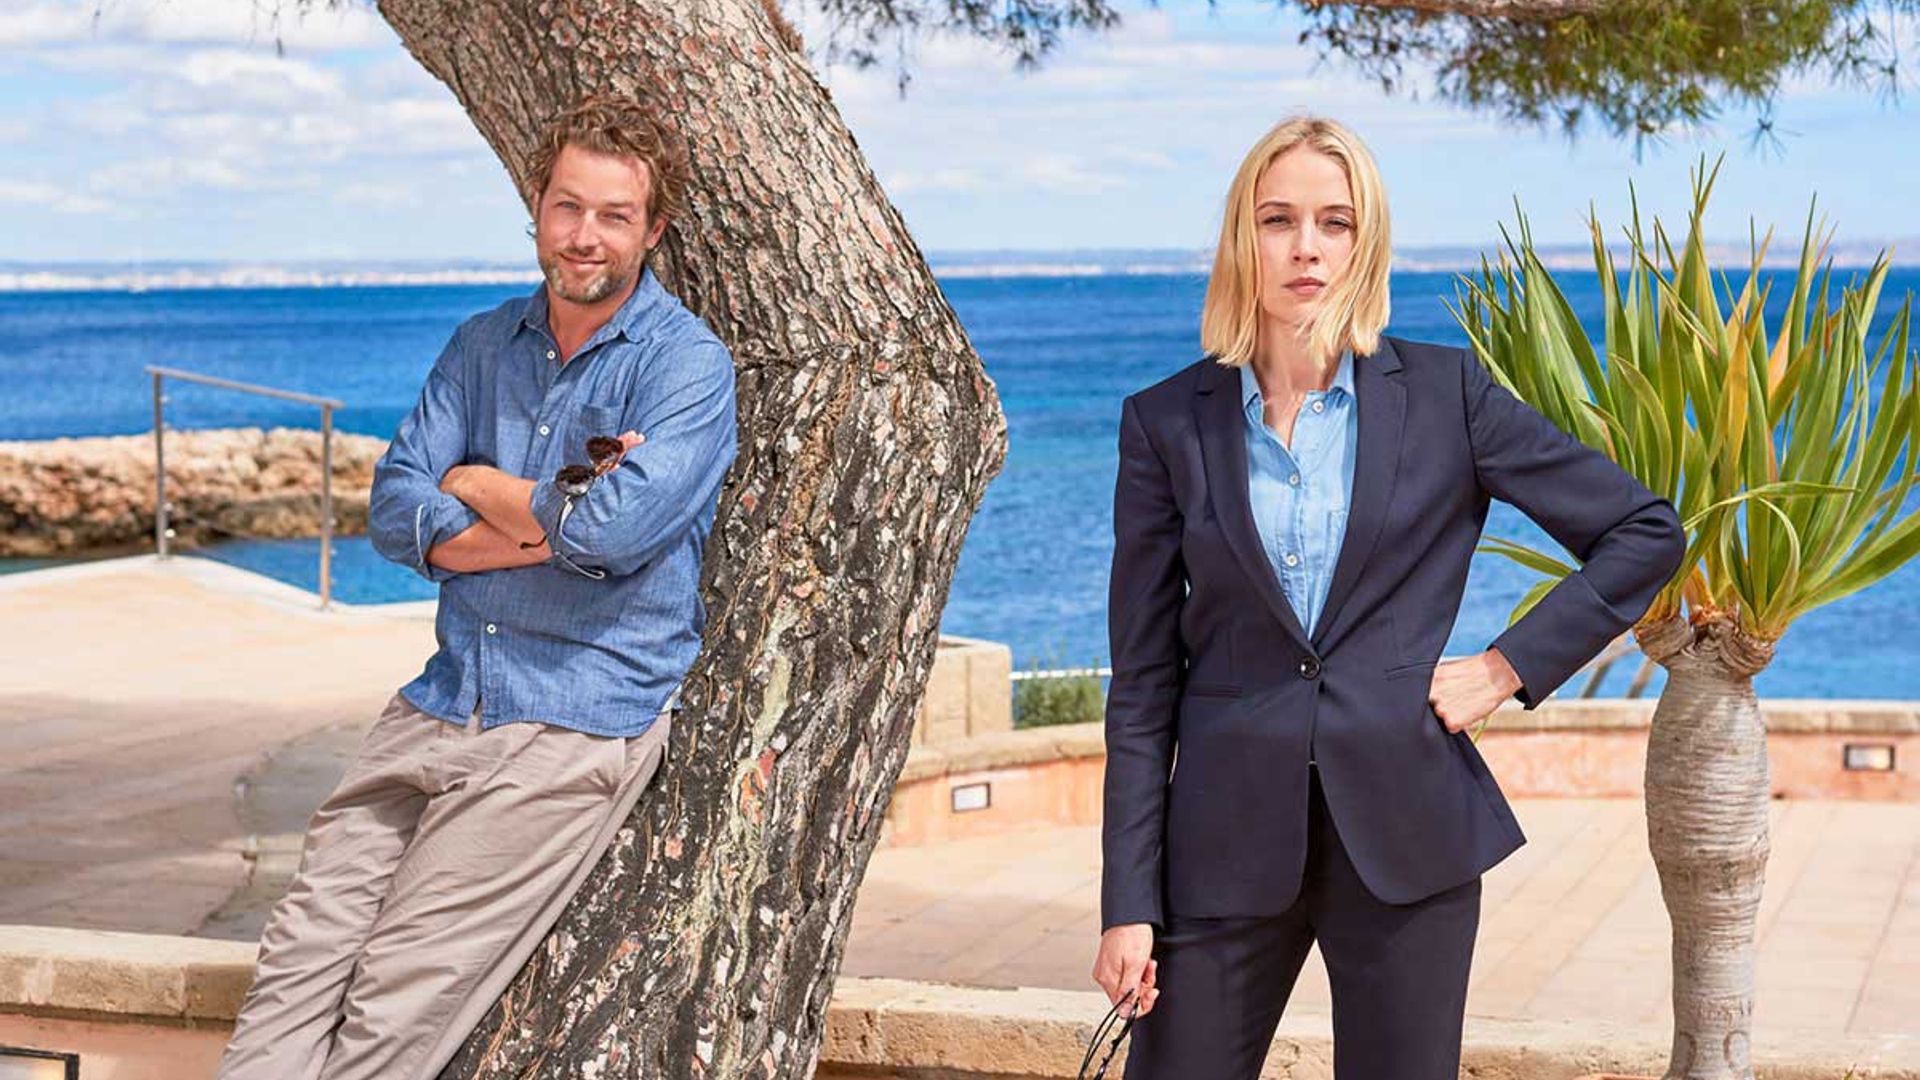 The Mallorca Files Meet the cast of the hit BBC daytime drama HELLO!